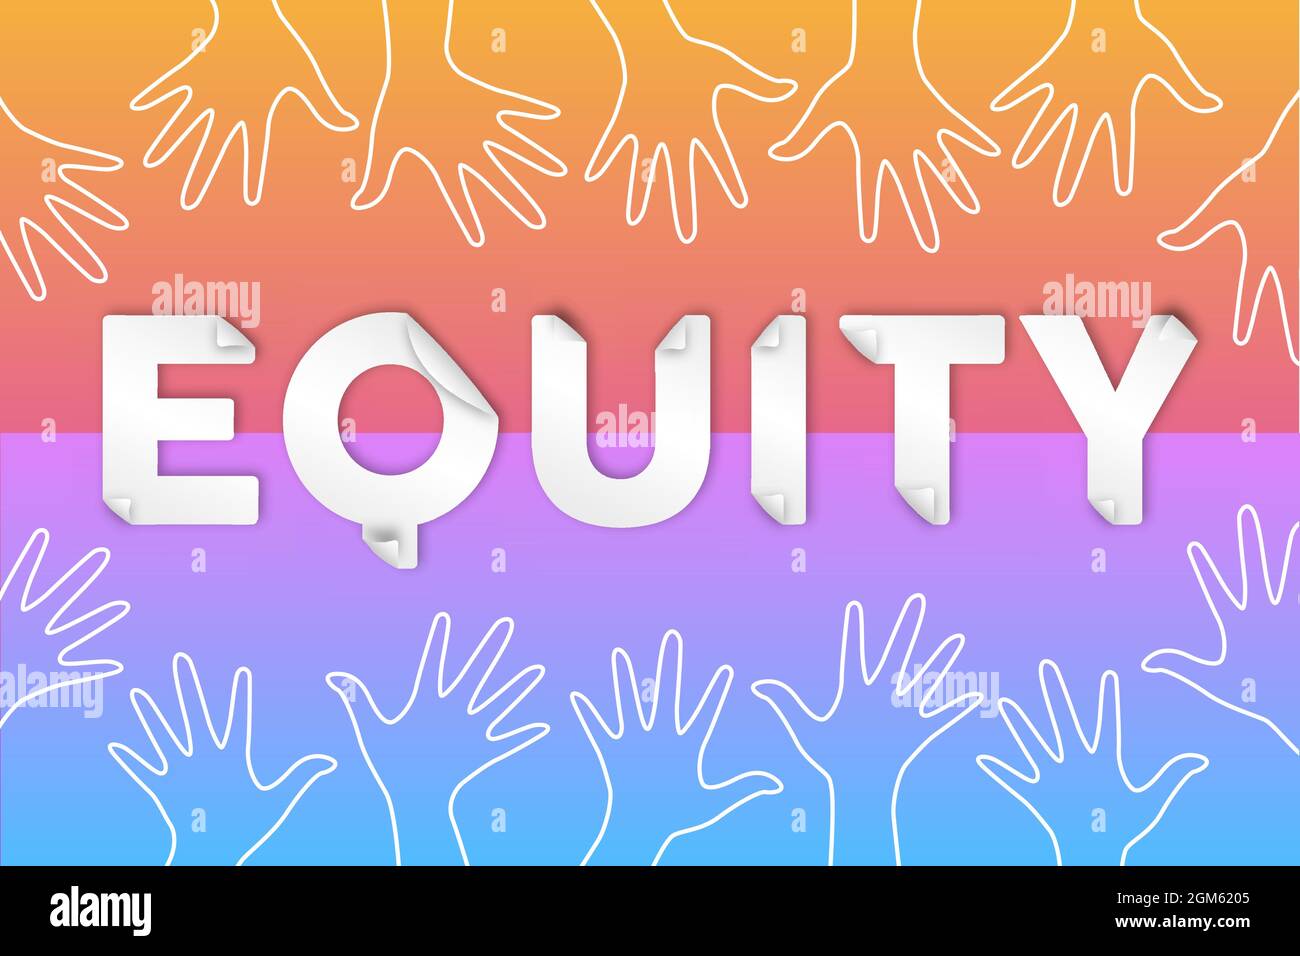 Equity text quote typography sign with people hands raised up together. Diverse cartoon team illustration for business or community equality. Stock Vector